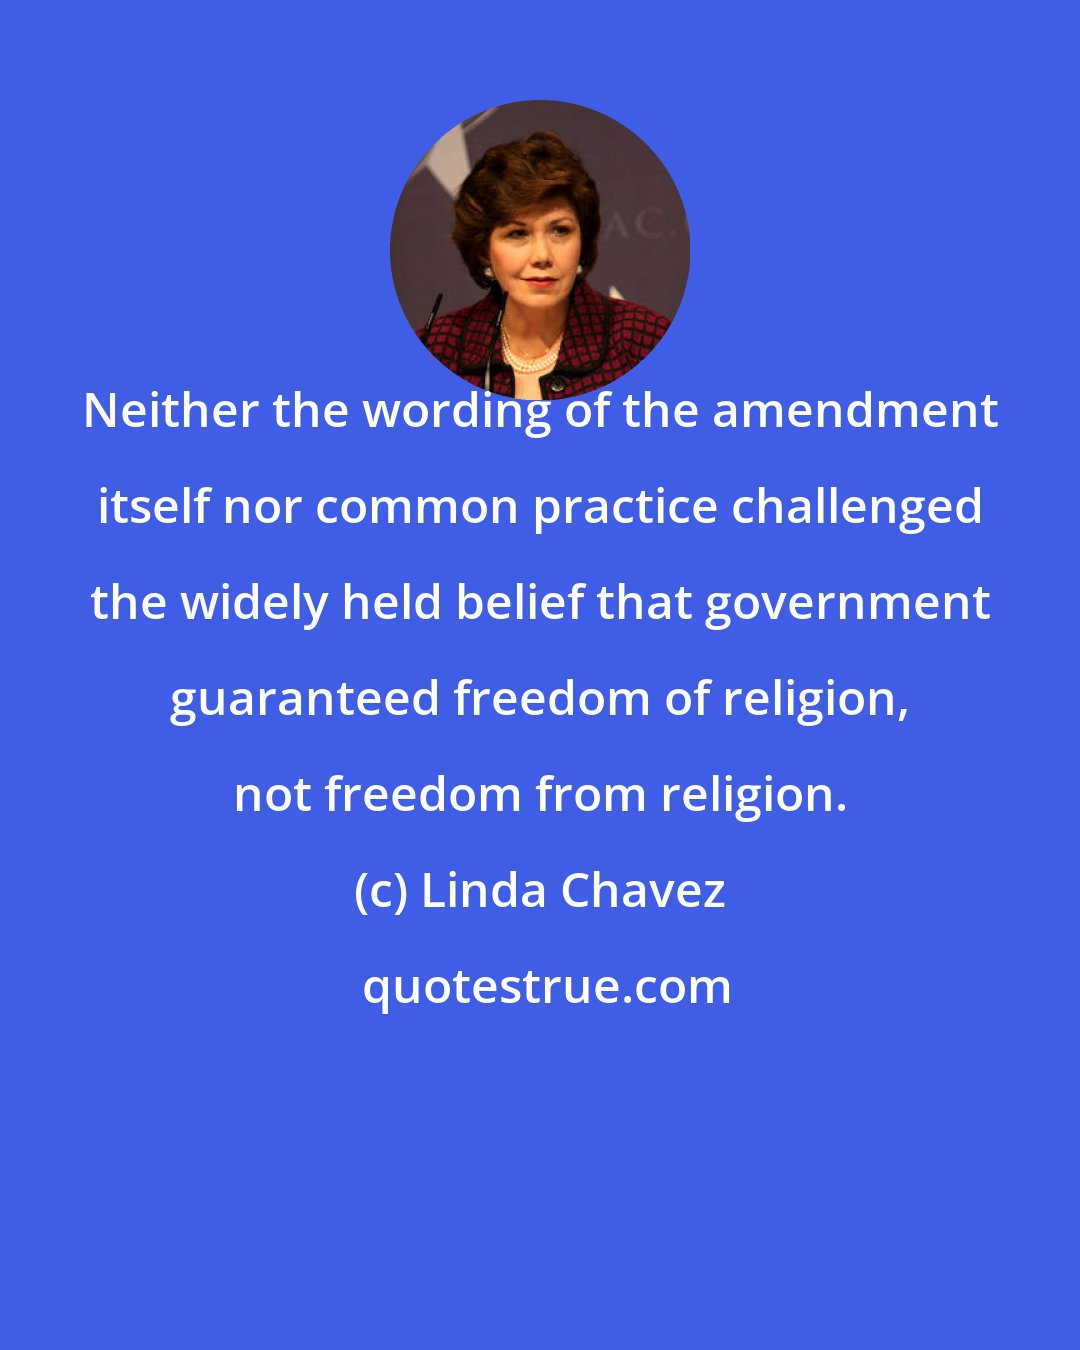 Linda Chavez: Neither the wording of the amendment itself nor common practice challenged the widely held belief that government guaranteed freedom of religion, not freedom from religion.